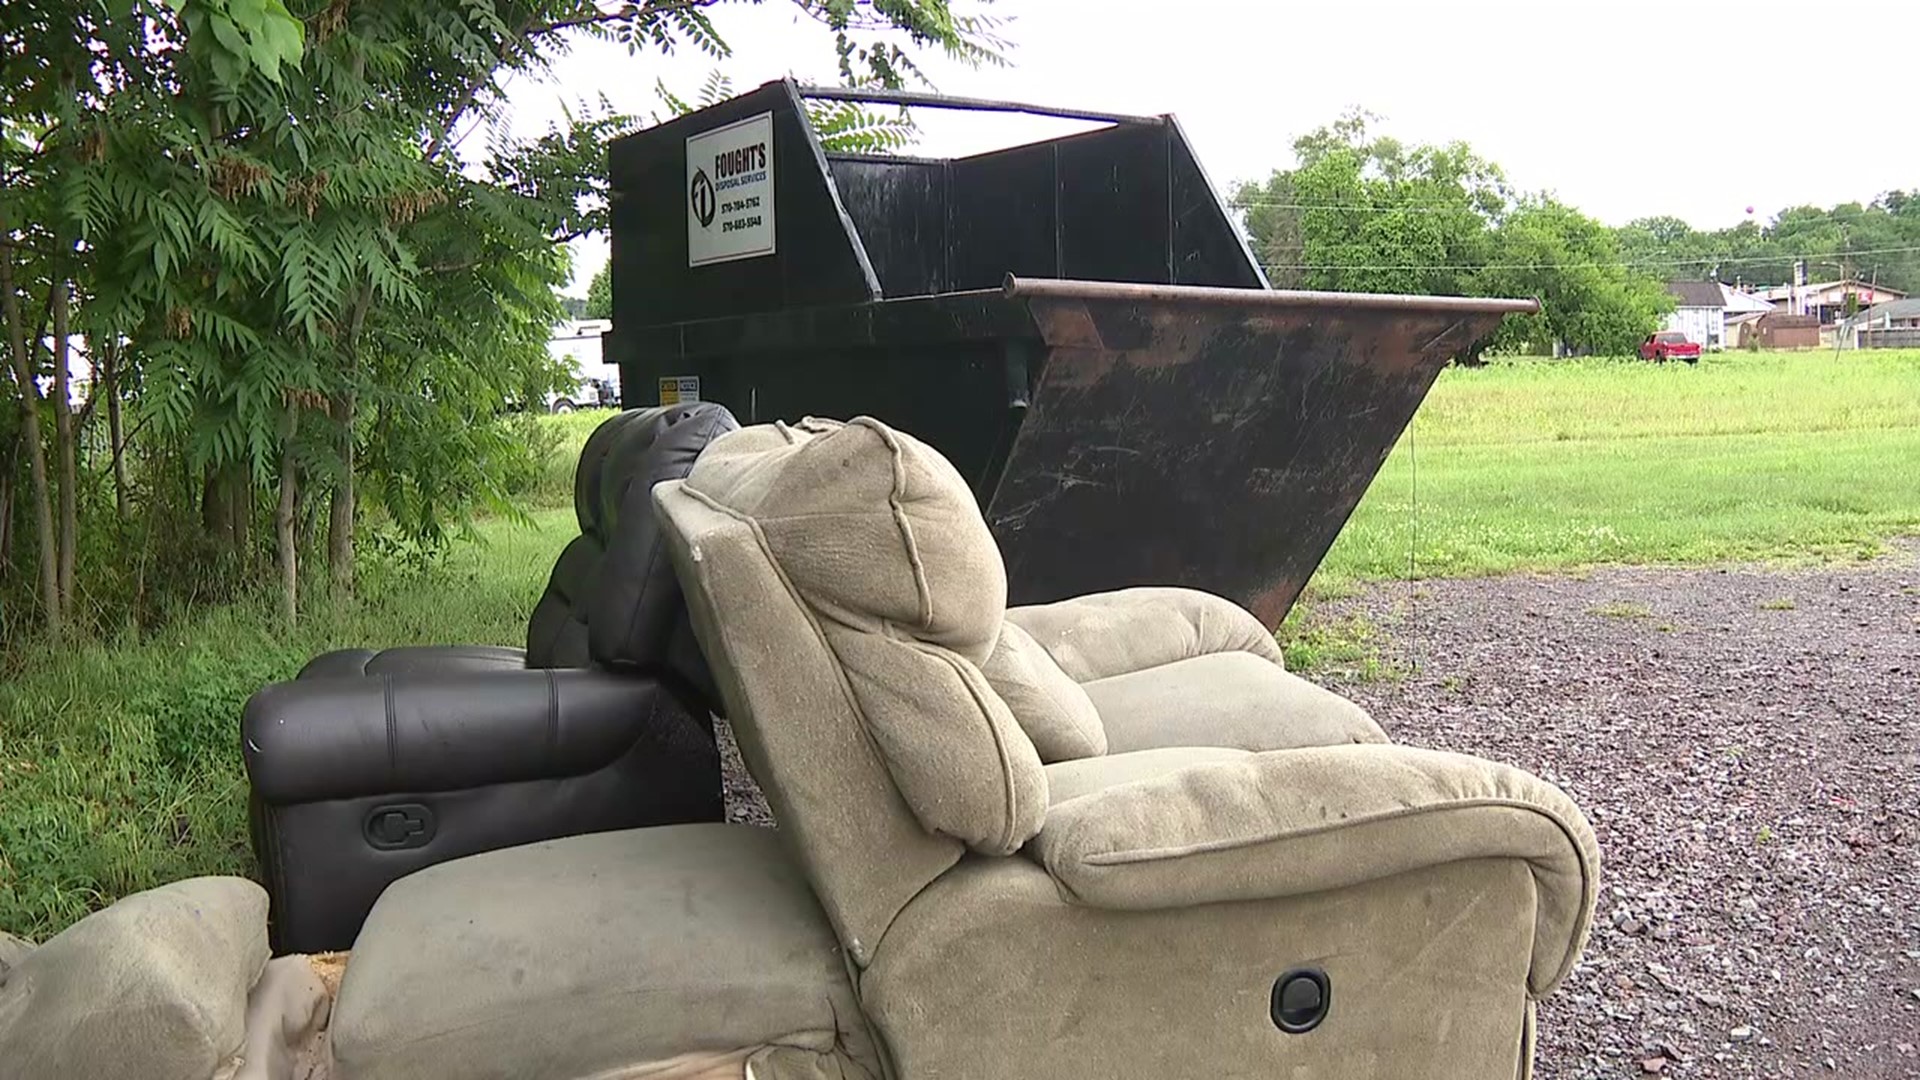 Illegal dumping has volunteers at the Animal Resource Center in Columbia County upset.